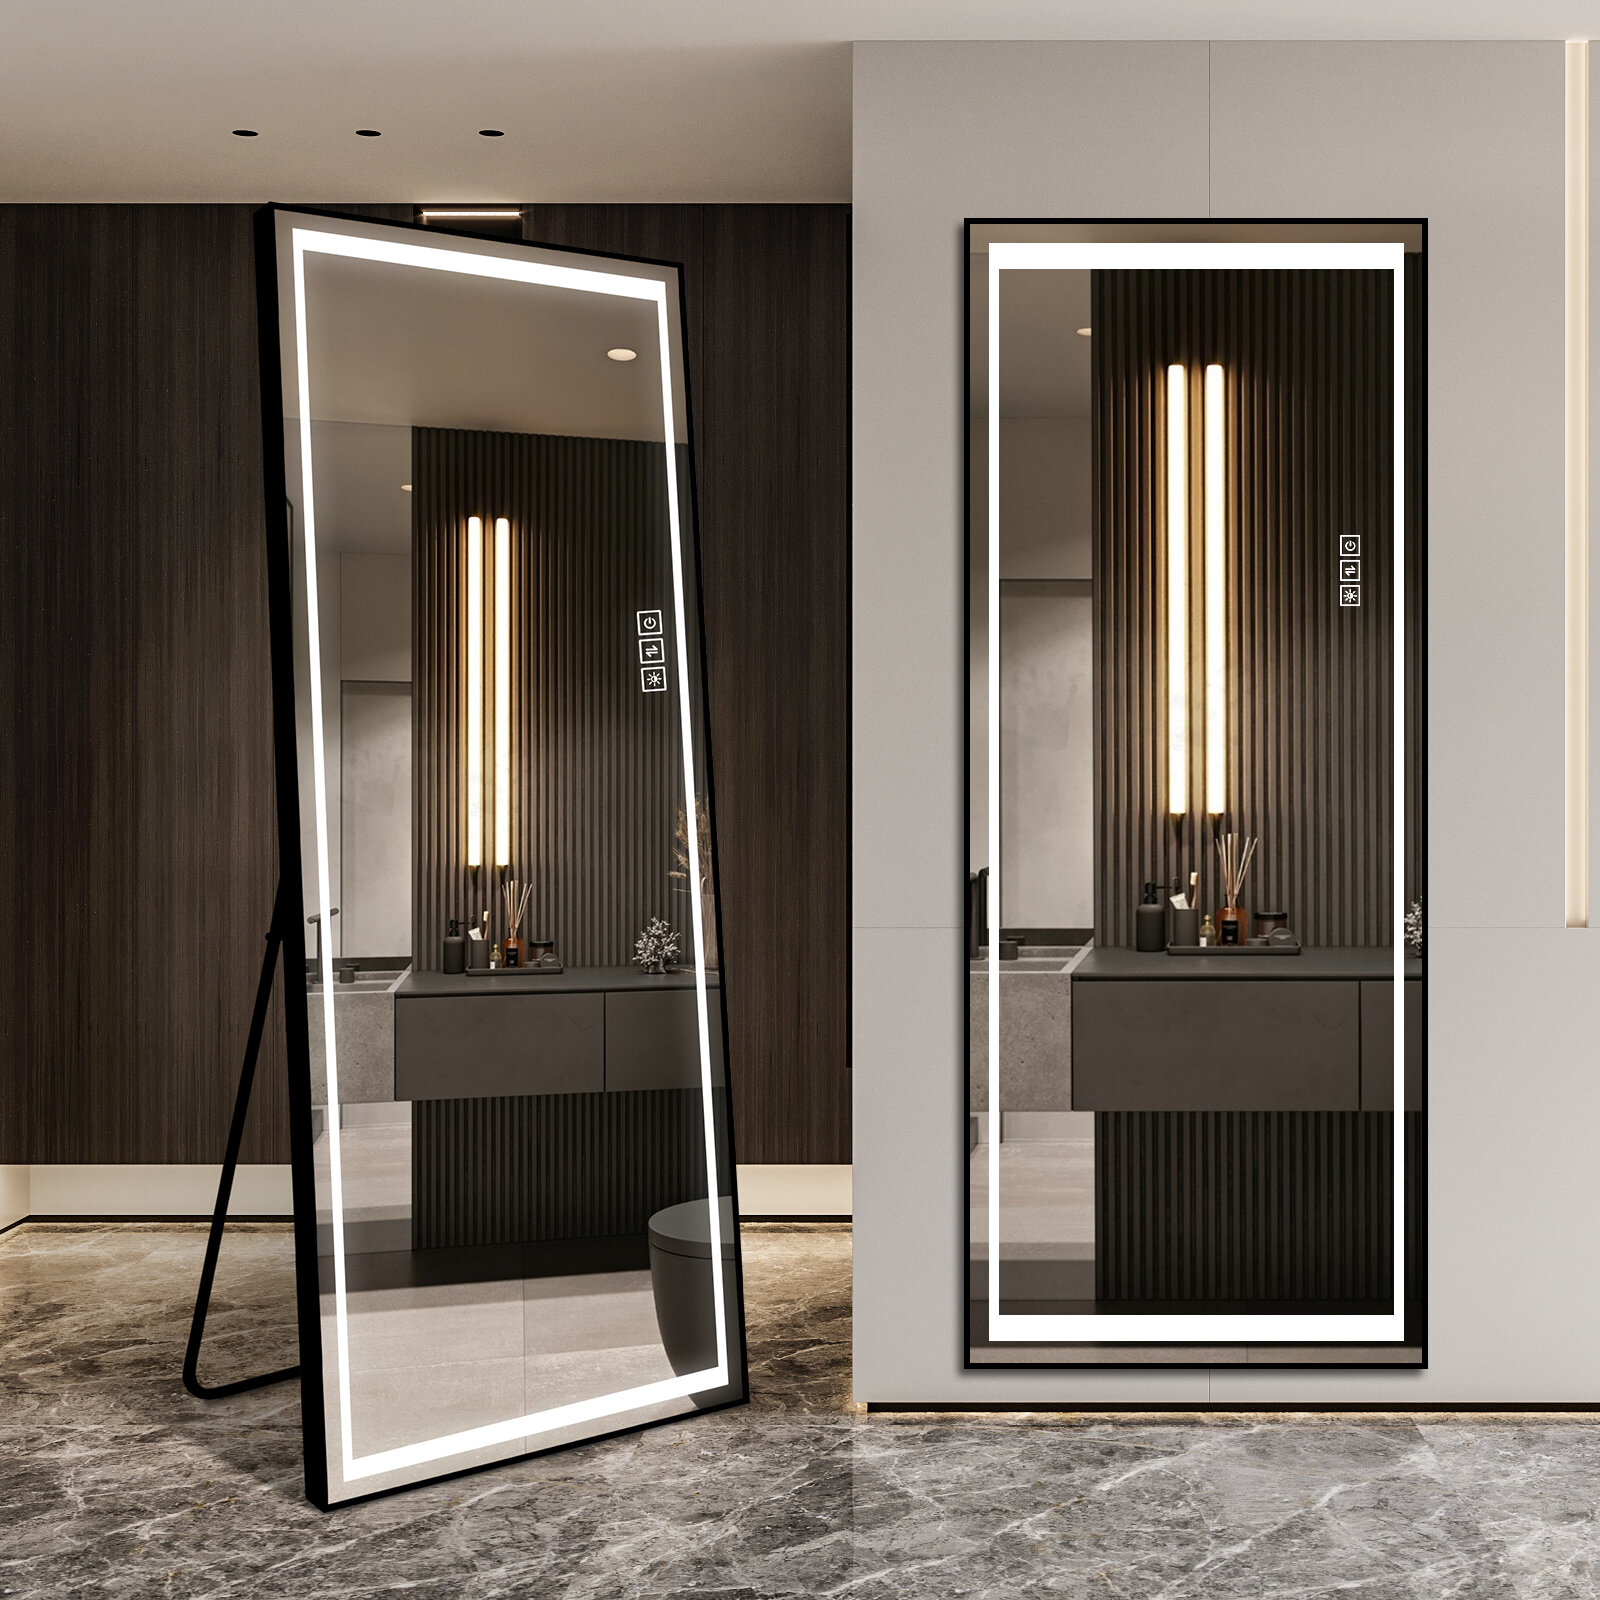 LAIYA LED Mirror Full Length with Lights Floor Mirrors with Stand Wall  Mirror Aluminum Full Body Dressing Bedroom,Dressing Room Hotel Mirror Safe  with